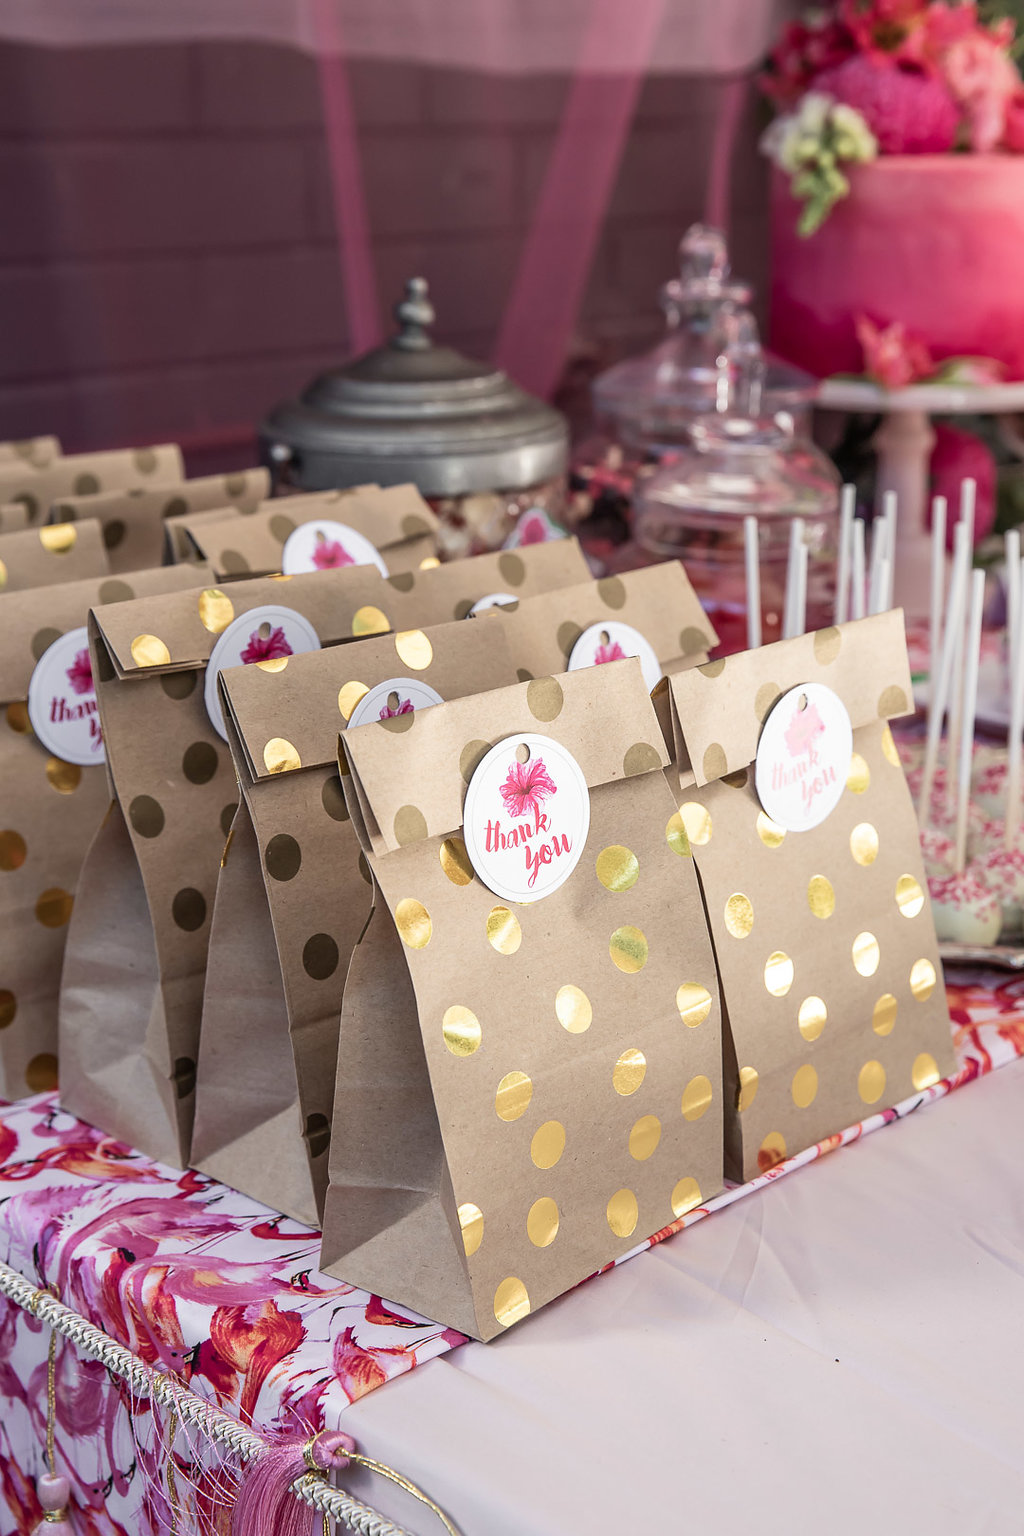 Treat bags at a flamingo themed birthday party